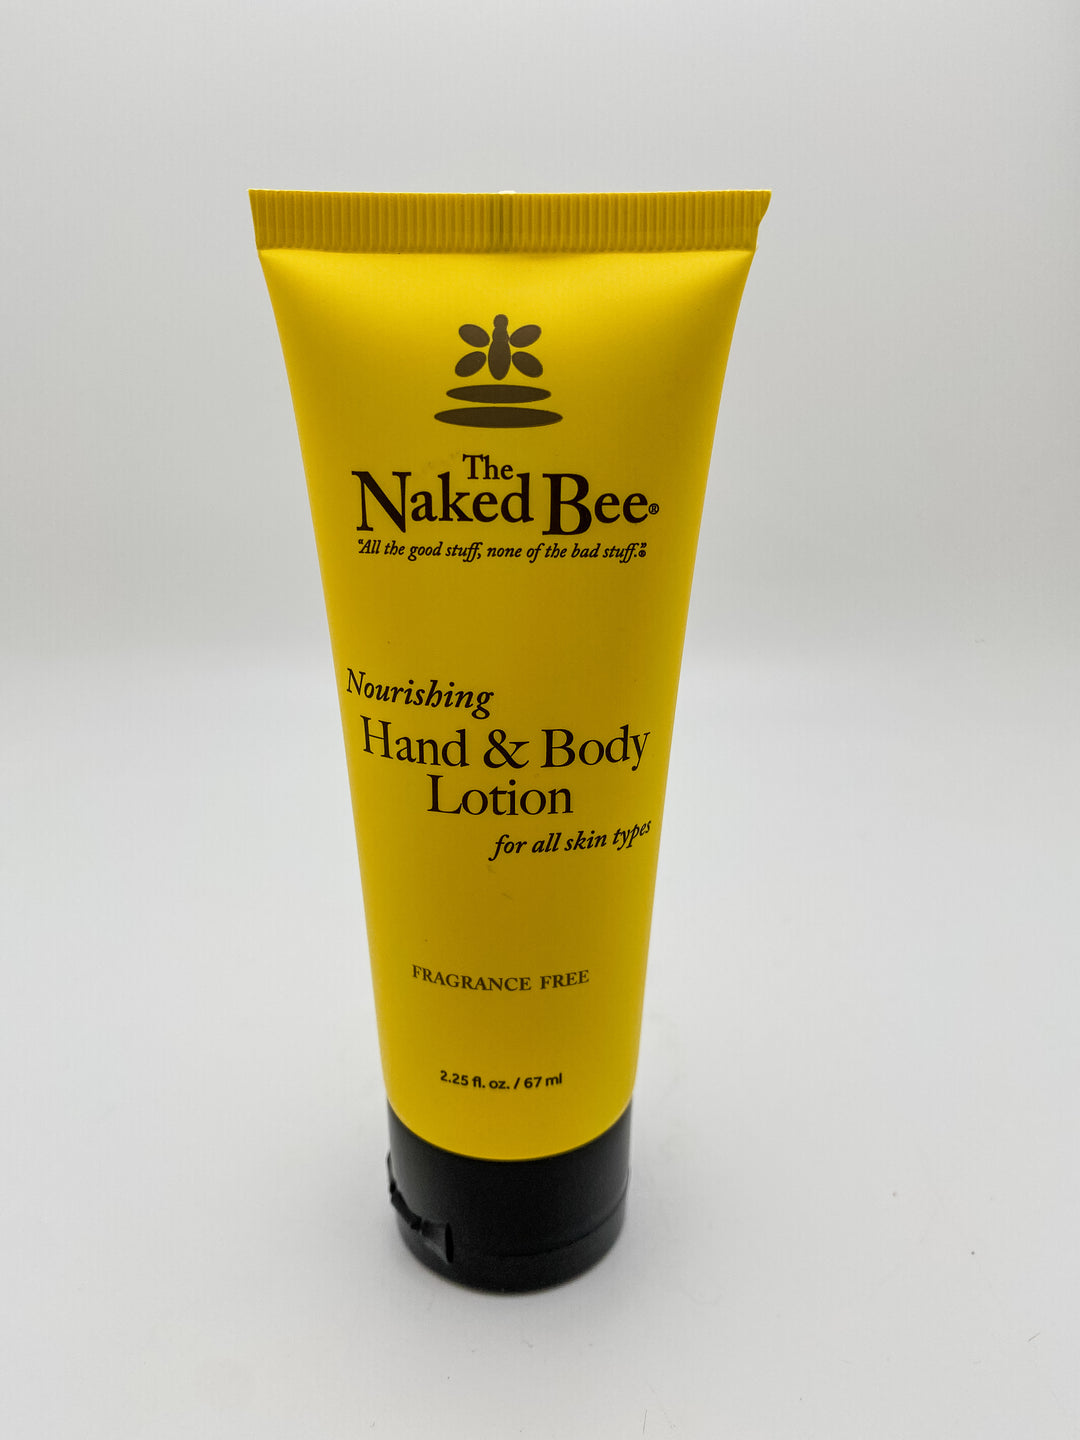 2.25oz Fragrance Free Hand & Body Lotion by The Naked Bee